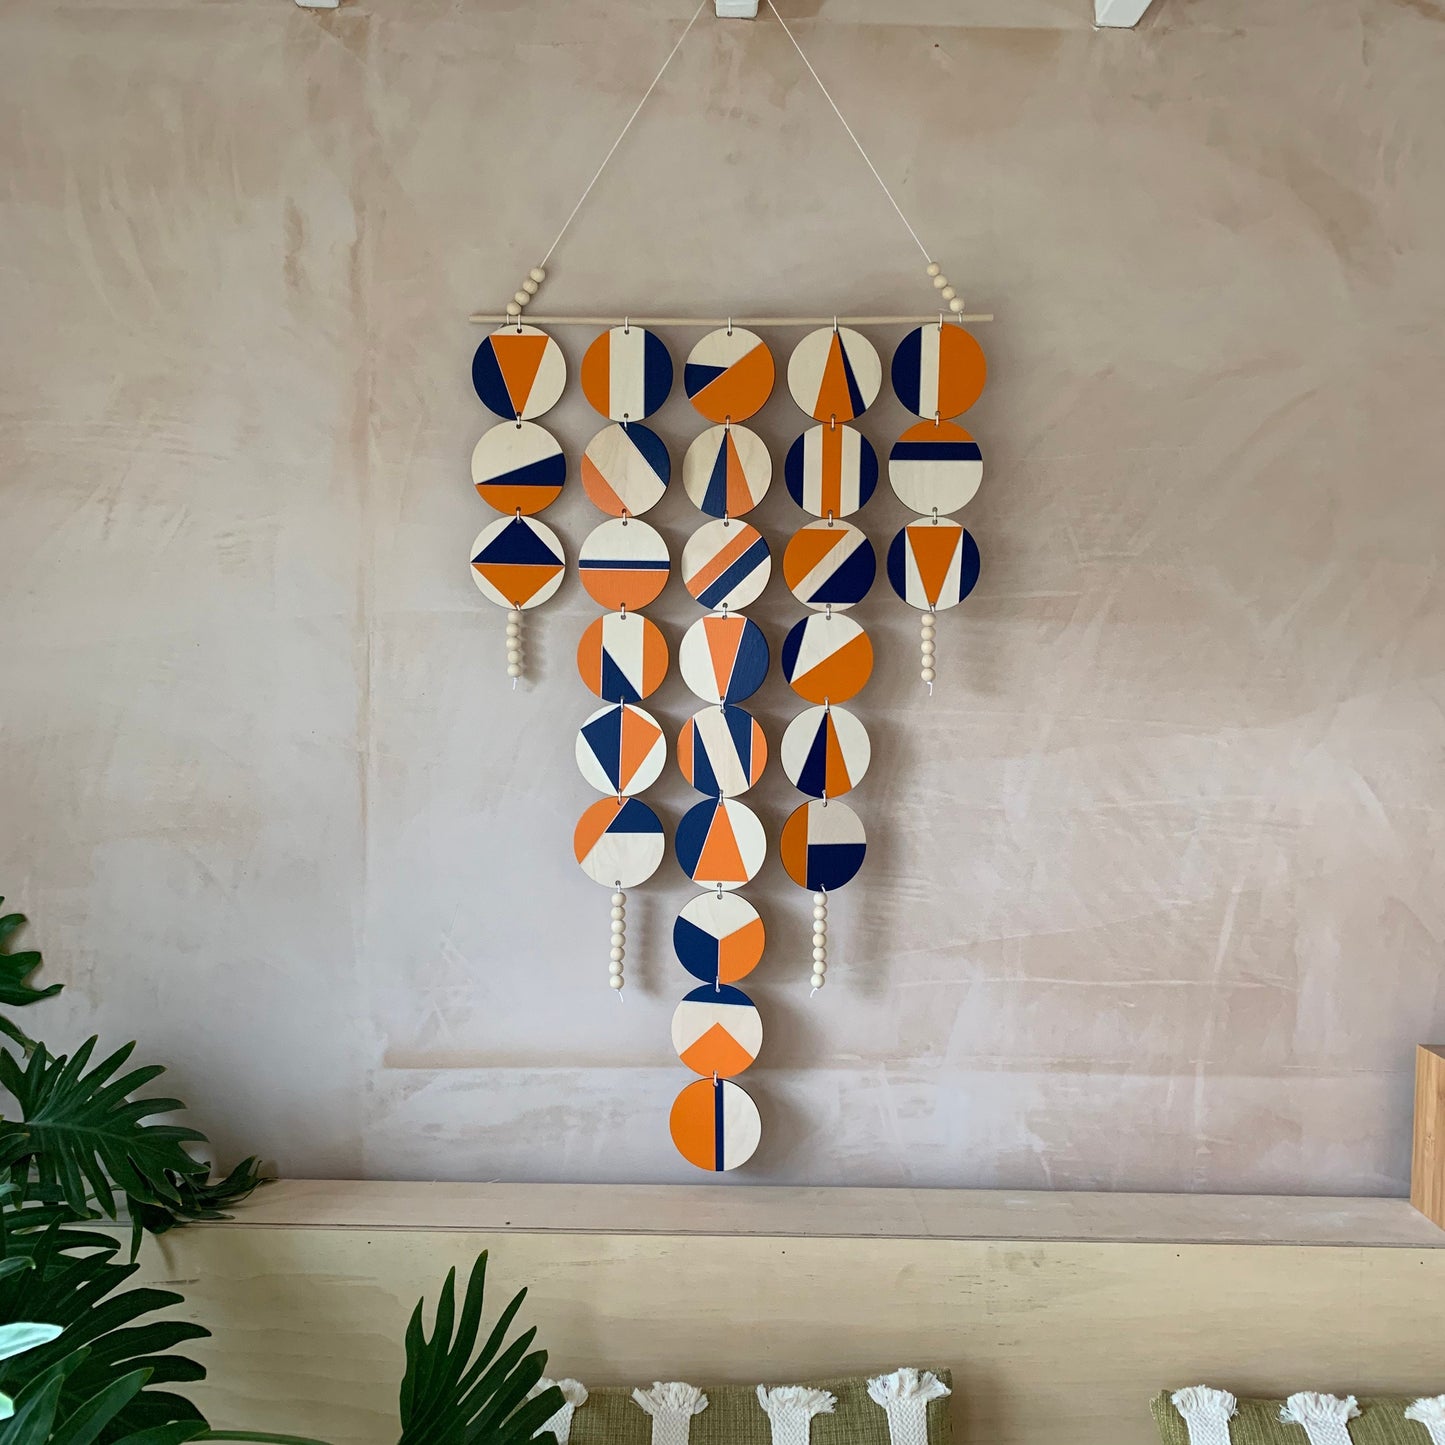 Large Chandelier Wall Hanging - Wall Hanging - Orange and Blue Geometric Art - Scandi Wall Decor - Home Wall Decor - Big Wall Tapestry